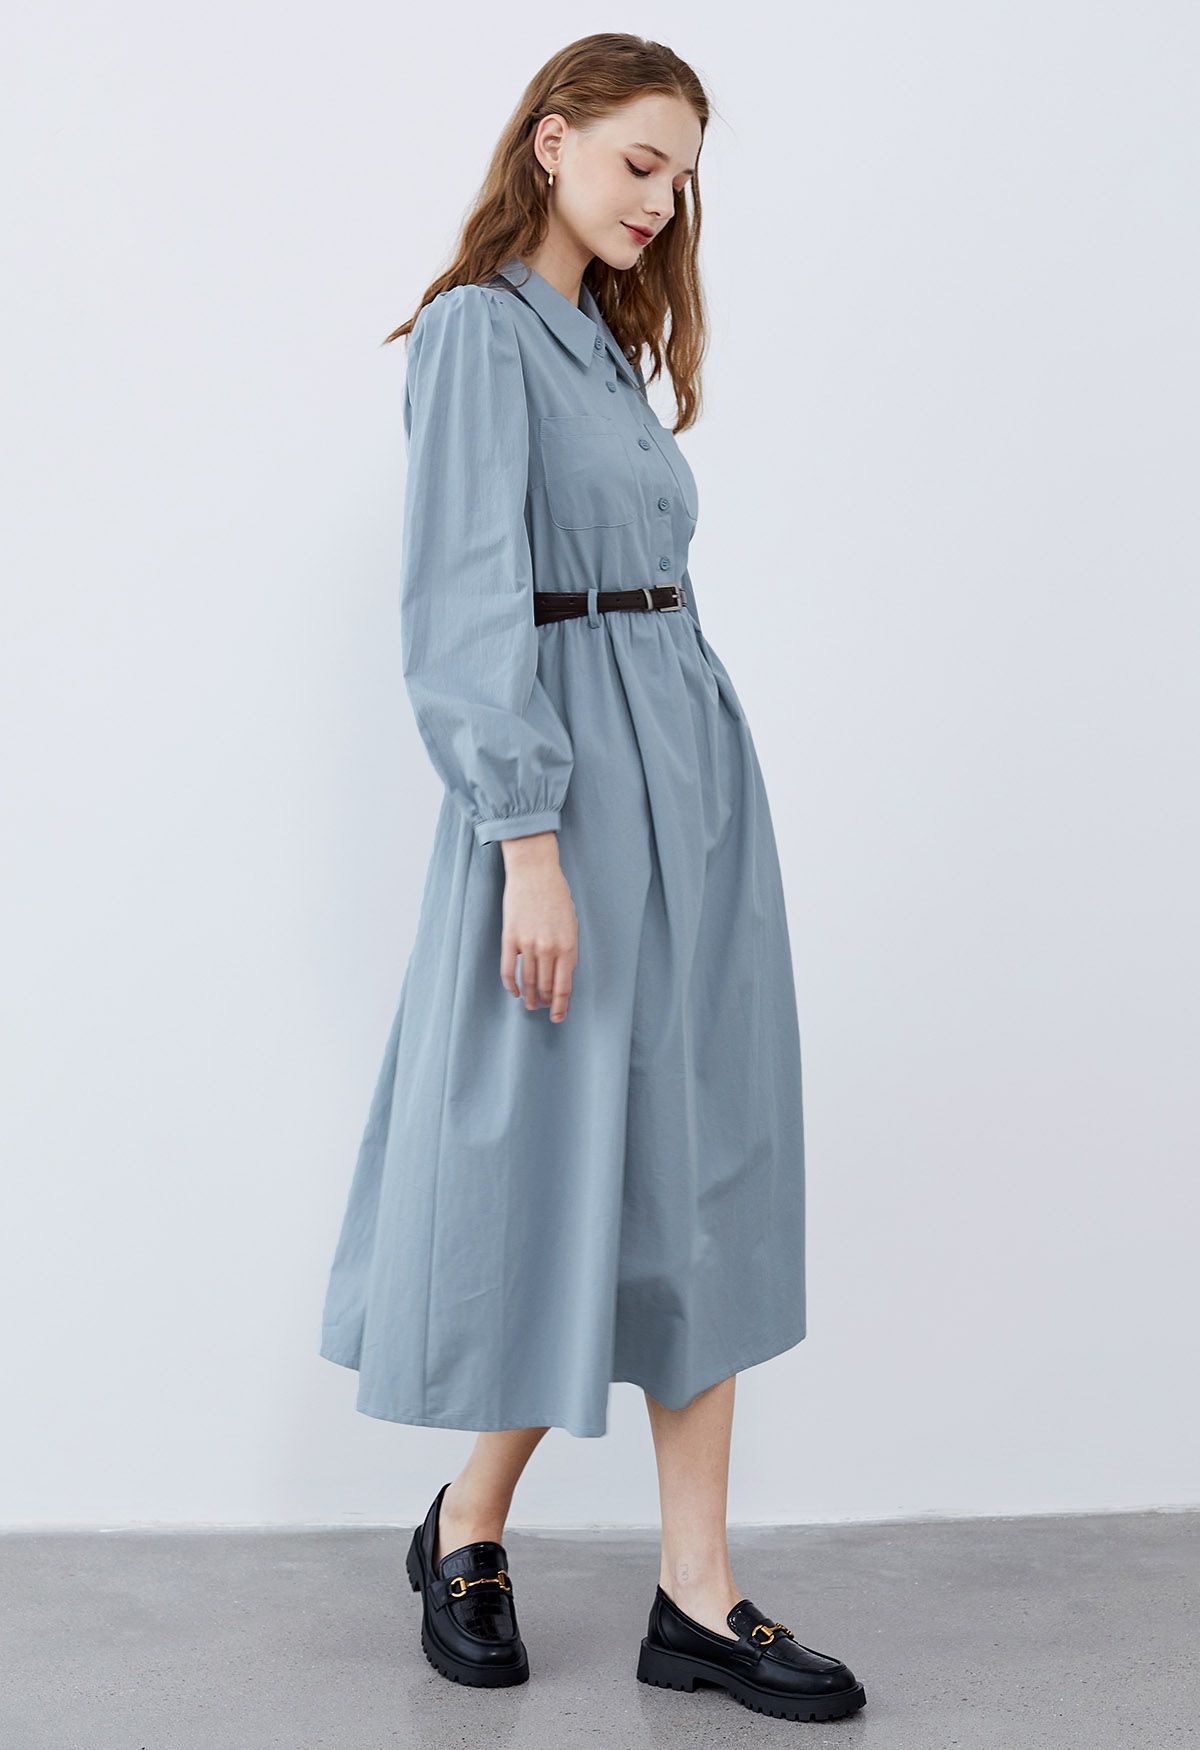 Patch Pocket Belted Cotton Shirt Dress in Blue